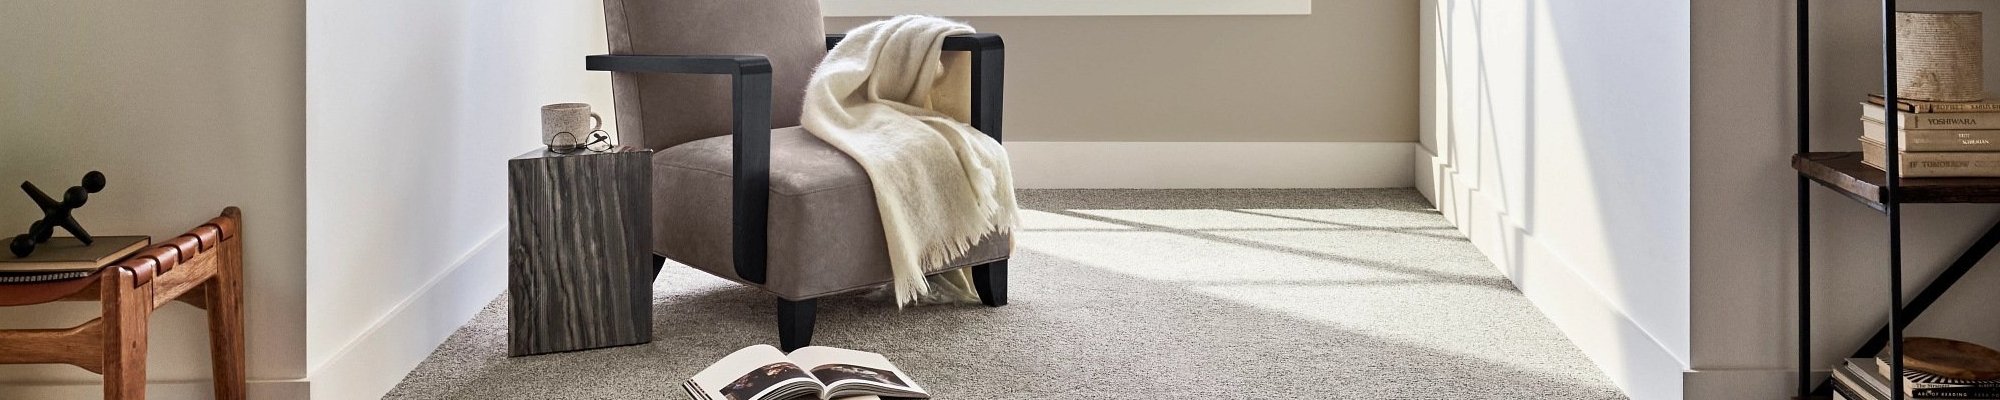 bright living space from The Barton Co. Carpets in San Antonio